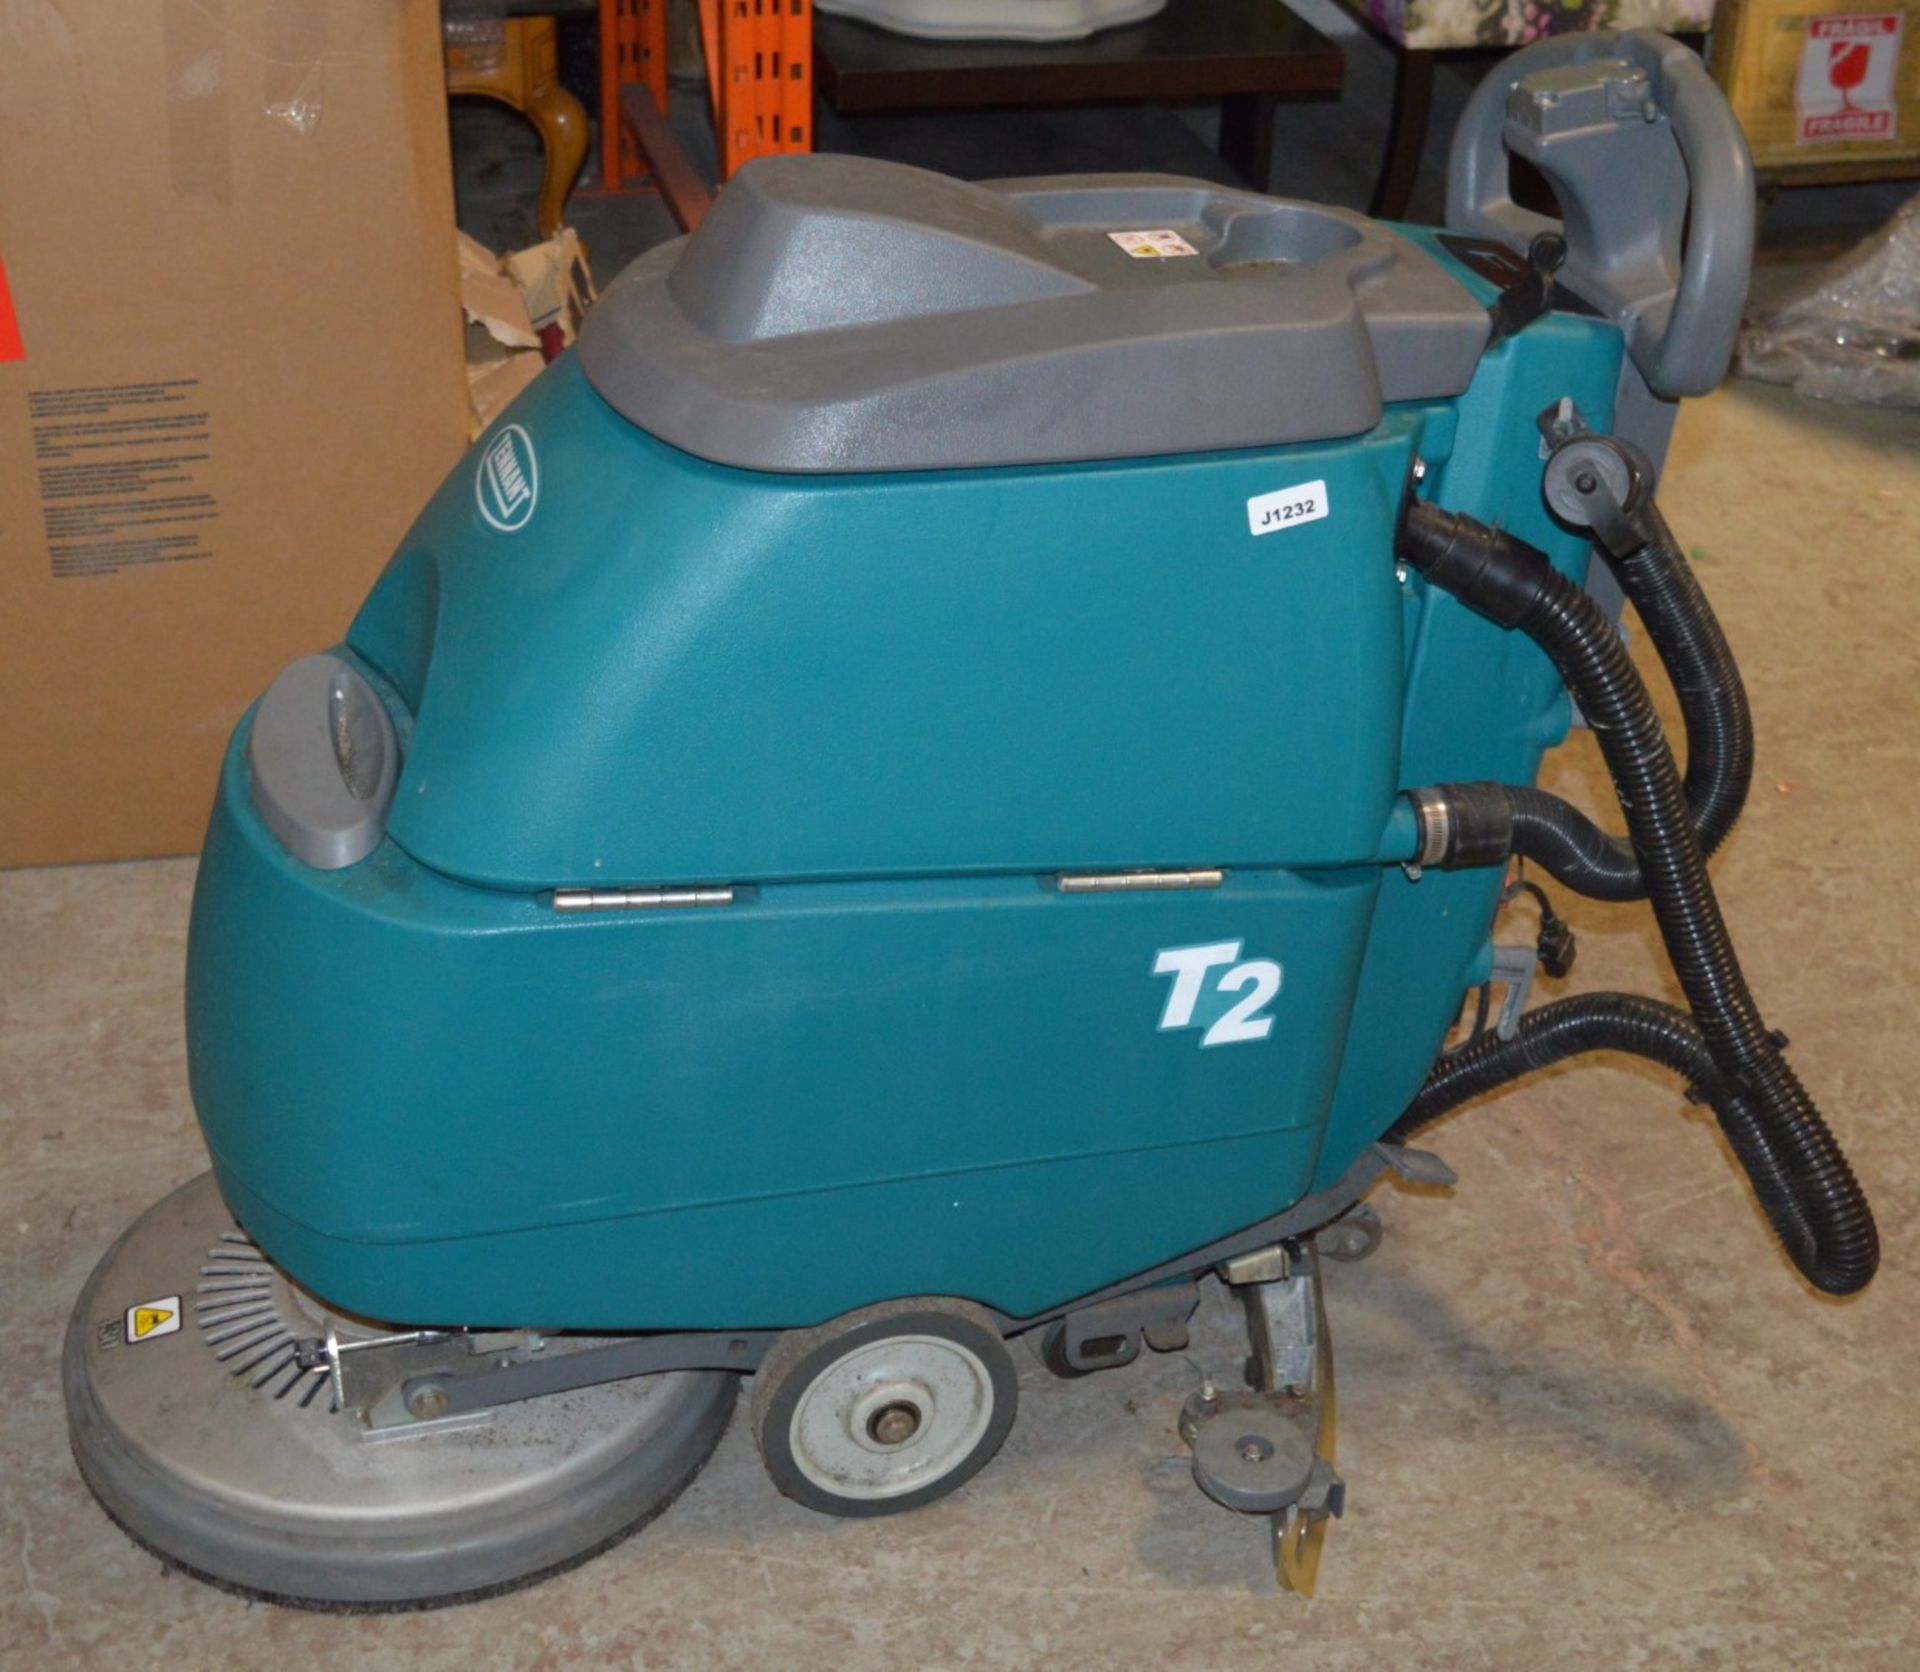 1 x Tennant T2 Mid-Size Walk-Behind Floor Scrubber - Supplied Keys and Spare Accessories - Ref: